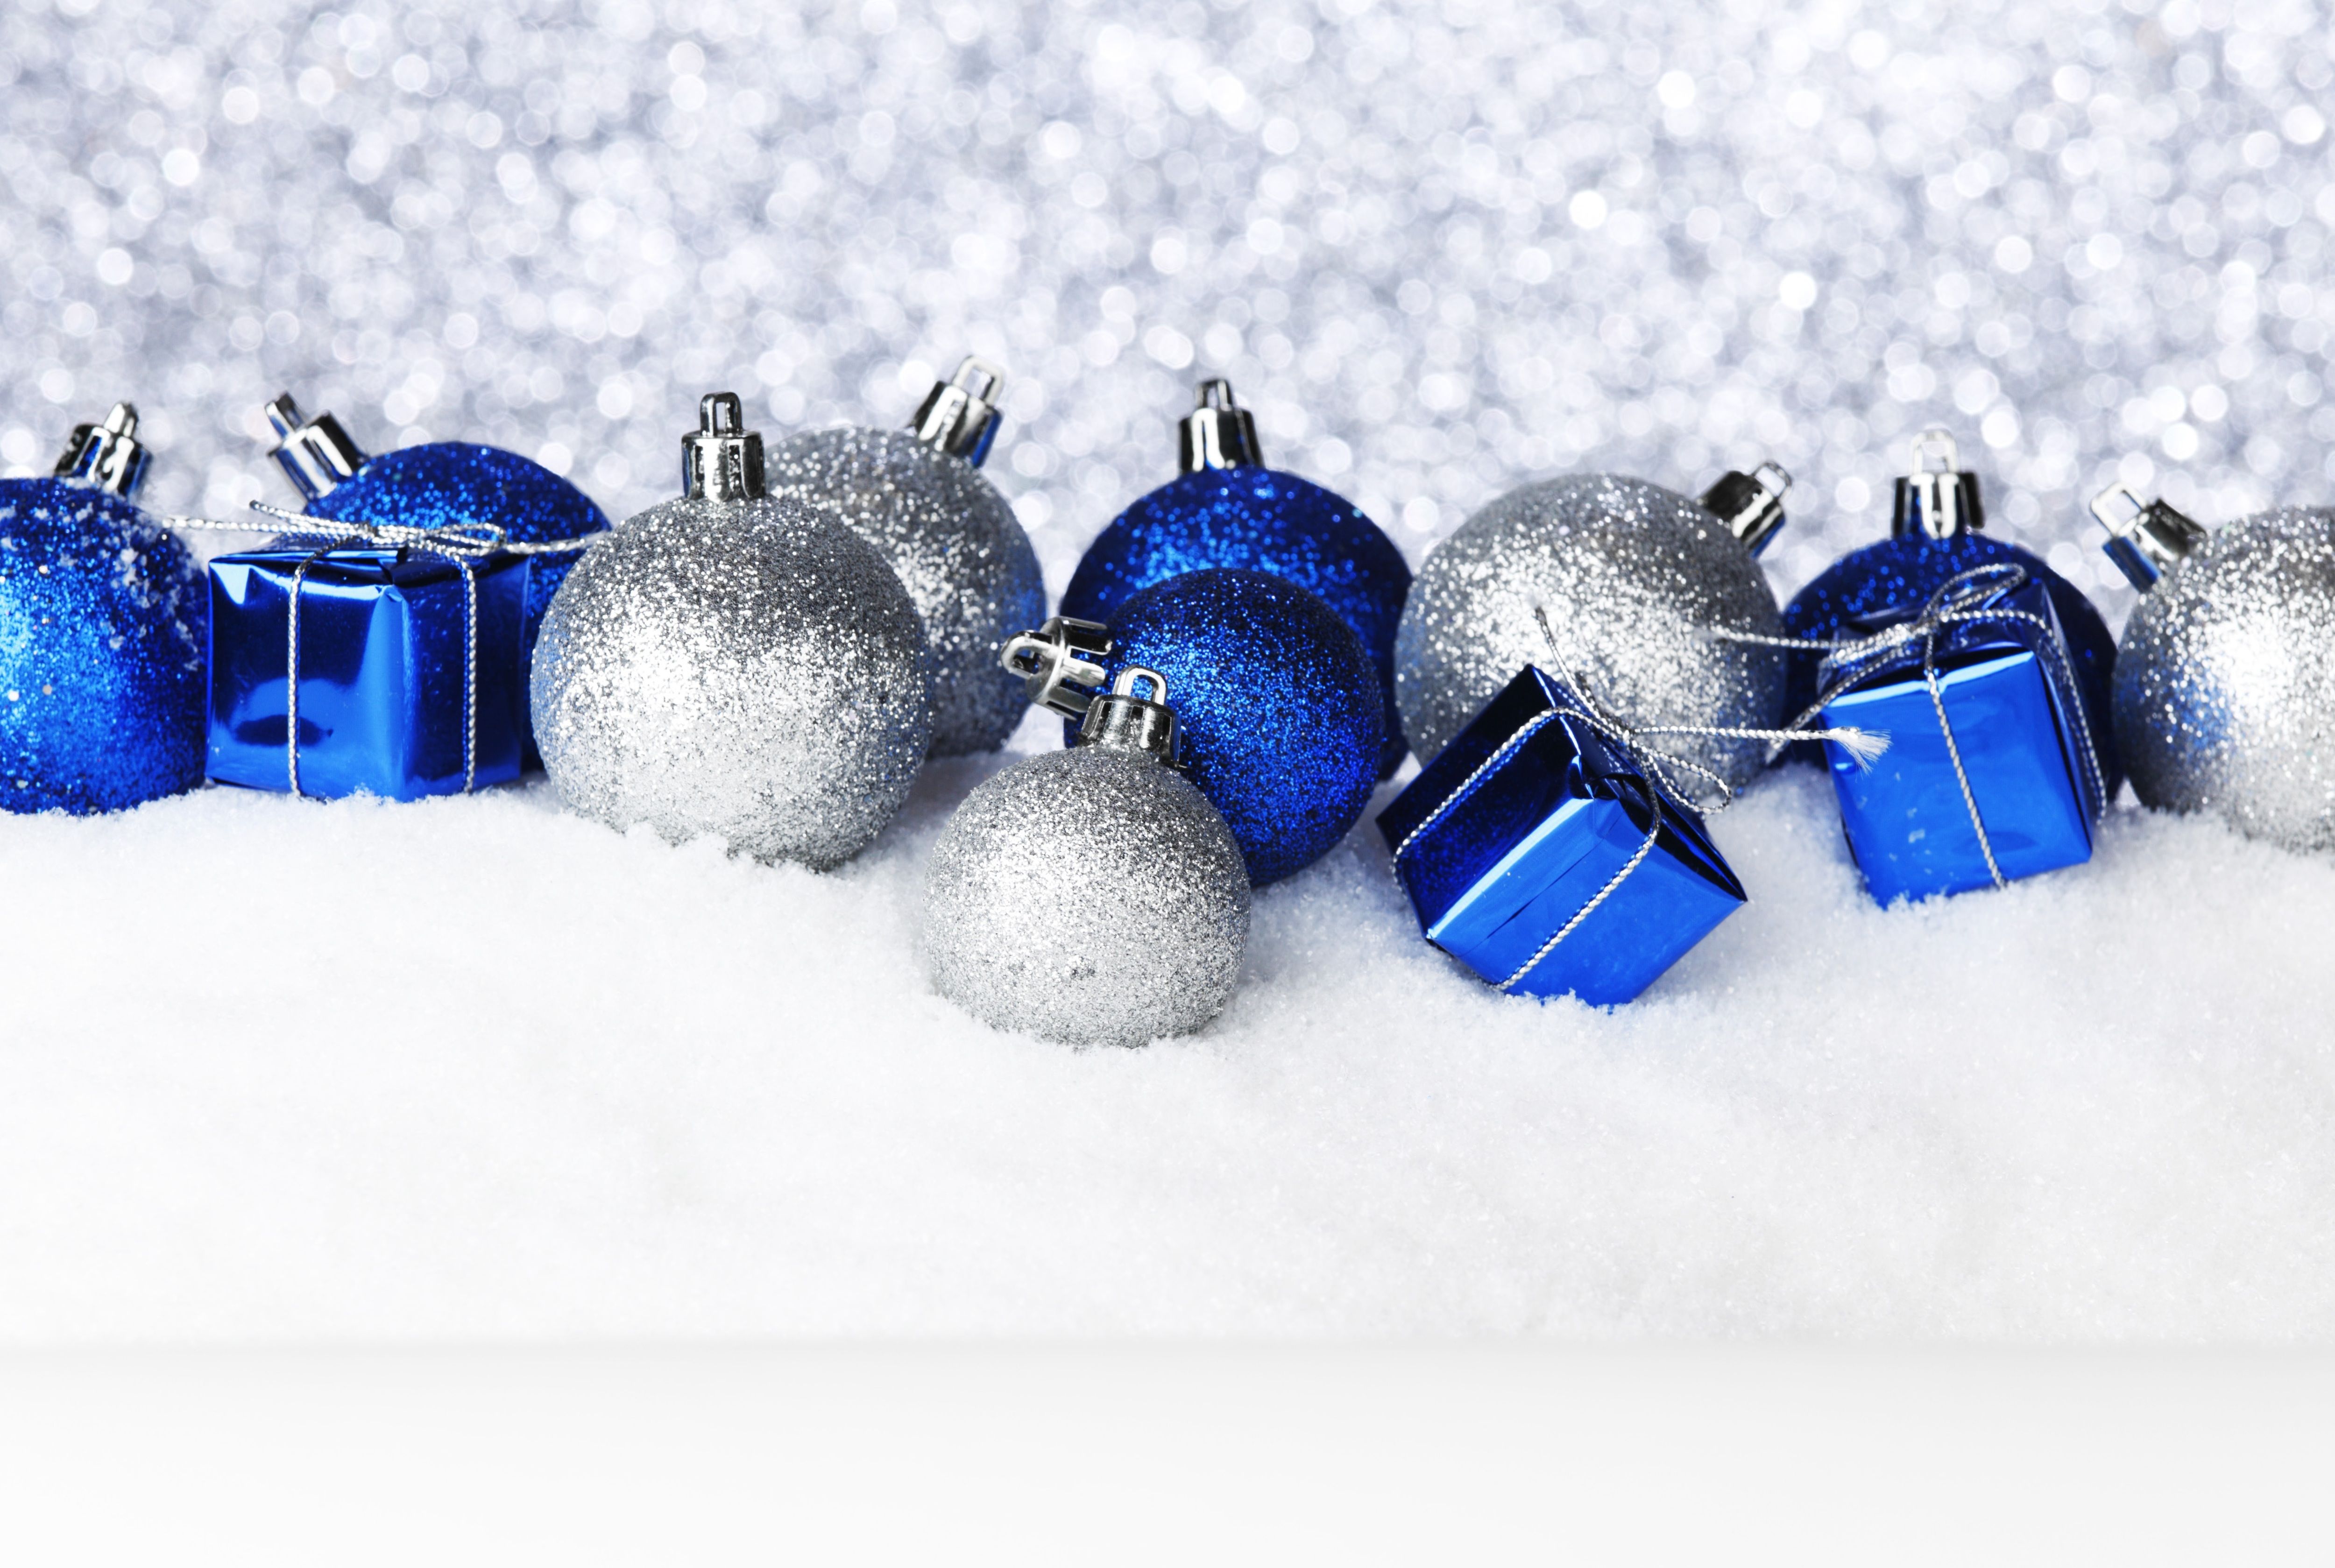 Download wallpaper winter, balls, snow, toys, New Year, Christmas, the scenery, white, Christmas, blue, holidays, New Year, Christmas, section new year / christmas in resolution 5000x3358